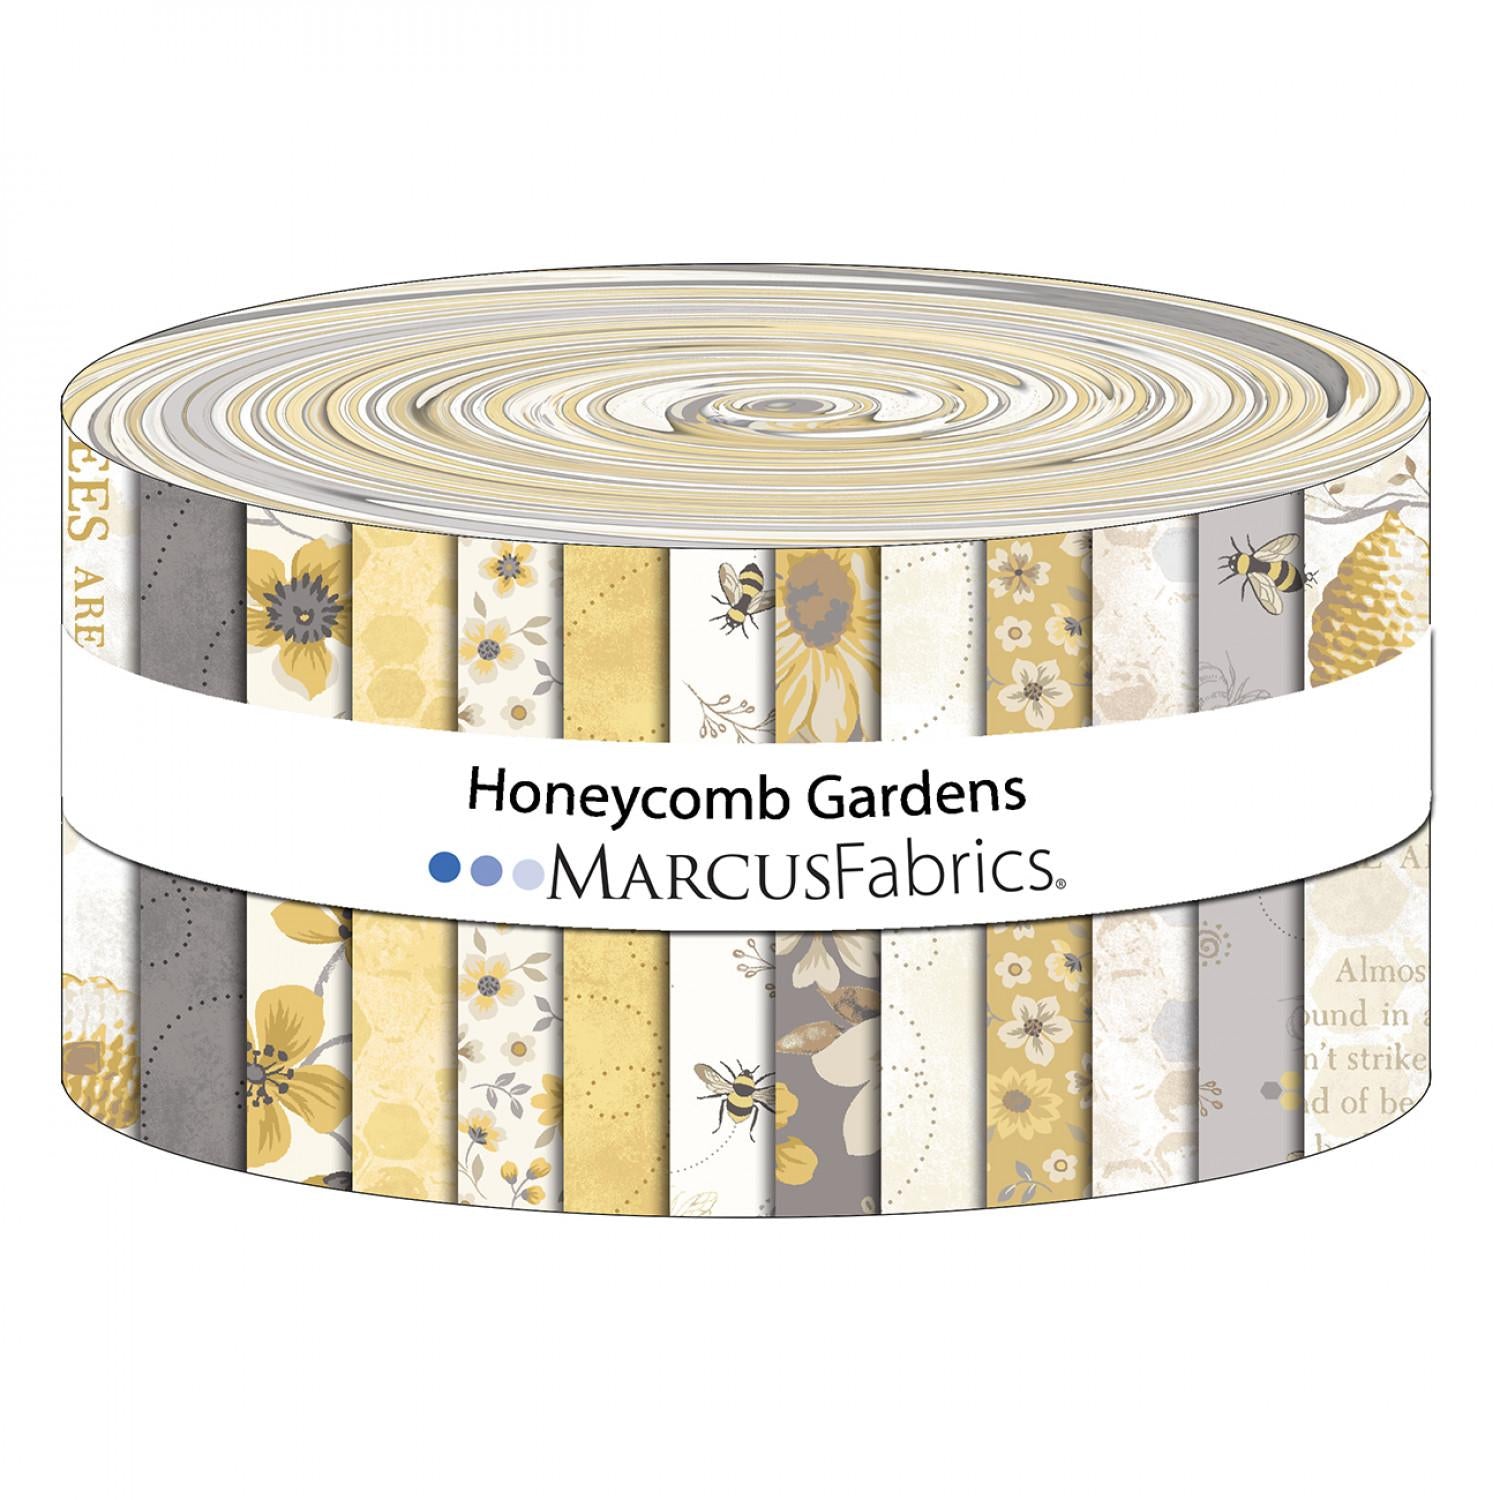 Honeycomb Gardens Jelly Roll - SS83-0006